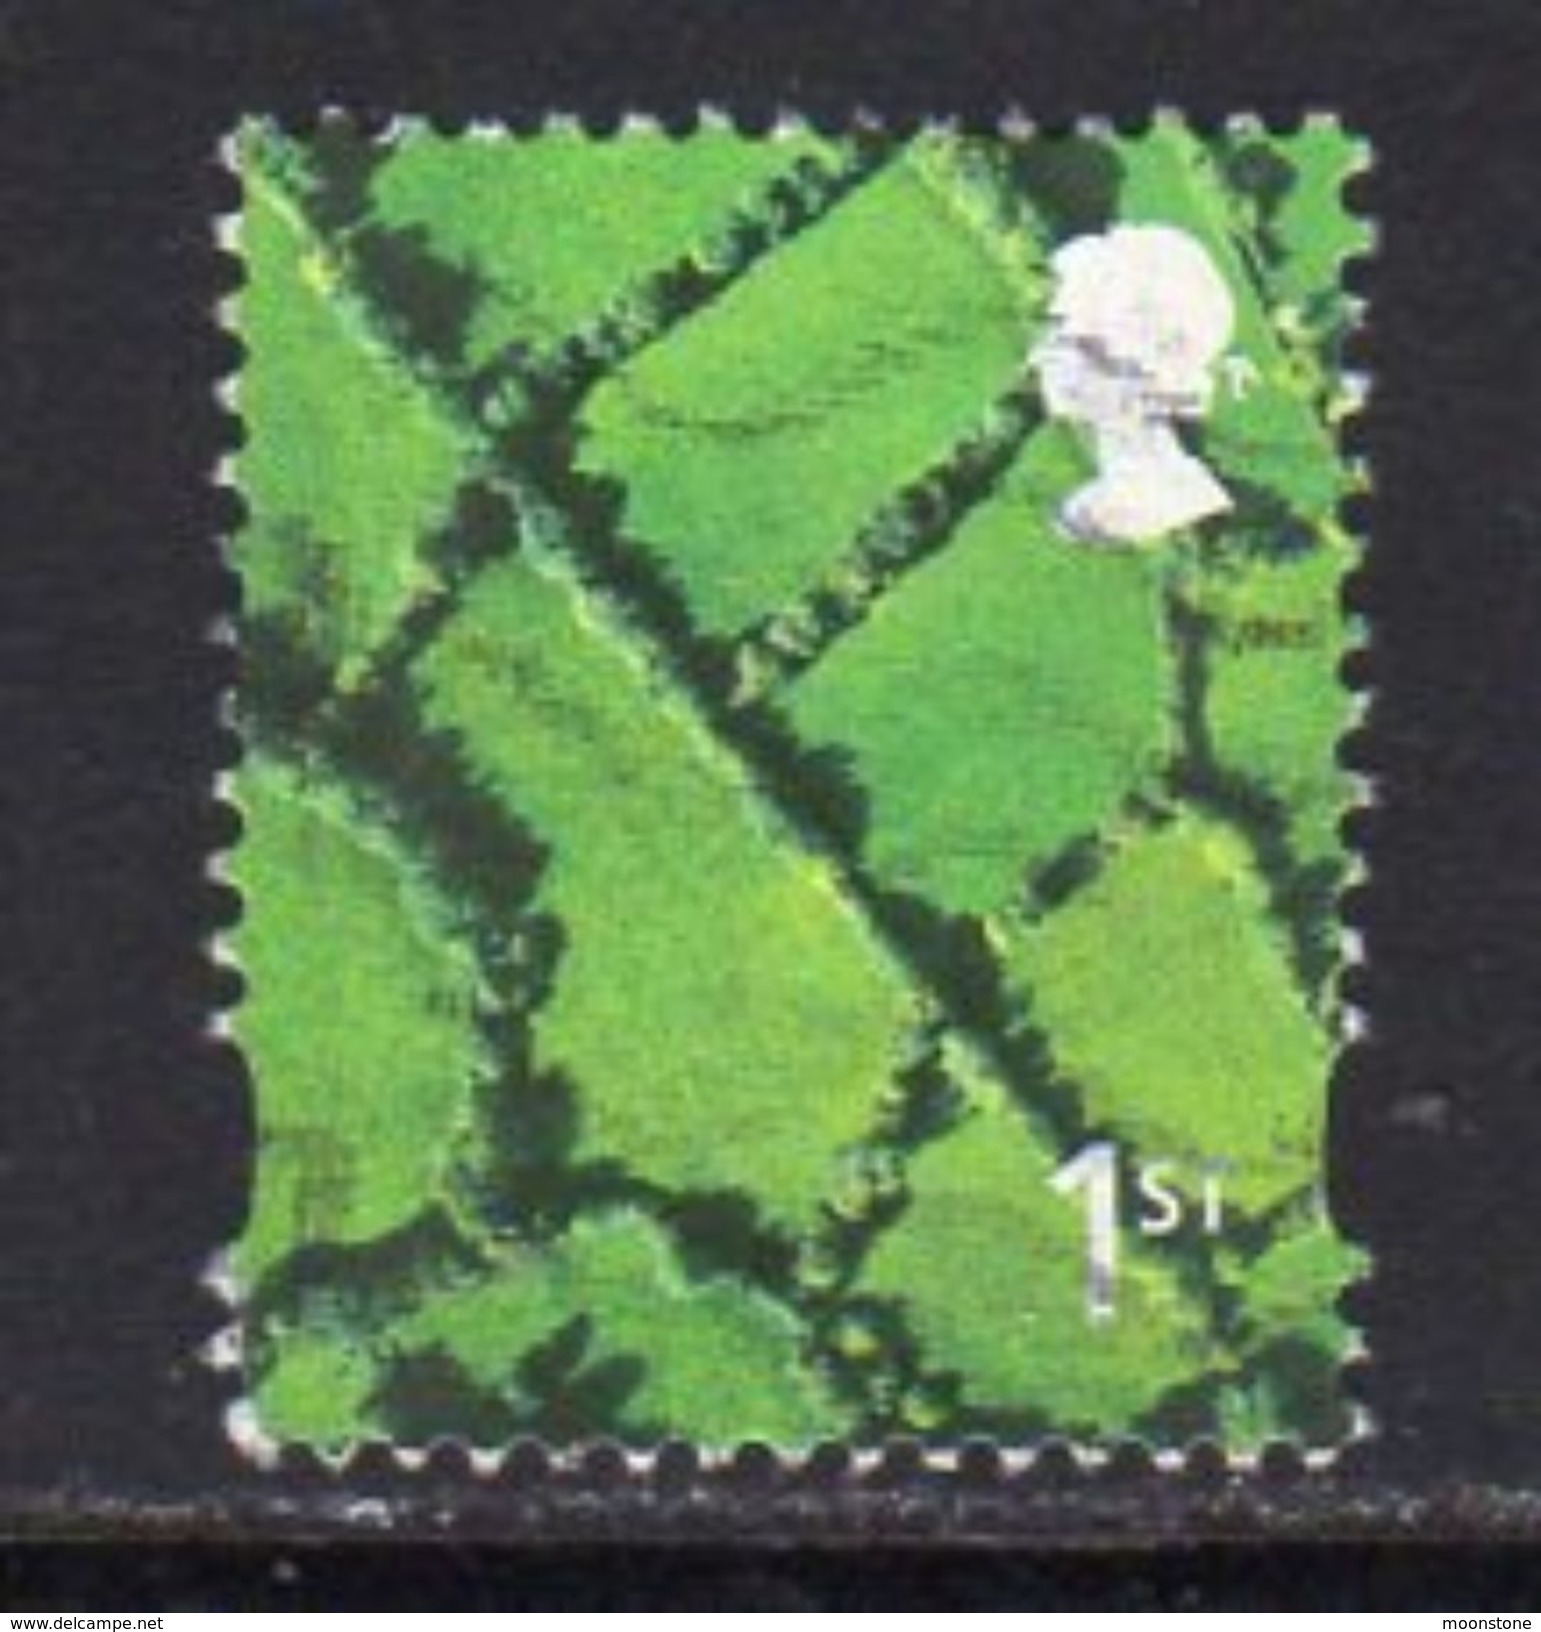 GB N. Ireland 2001-3 1st Class No Border Regional Country, Used, SG 90 - Irlande Du Nord